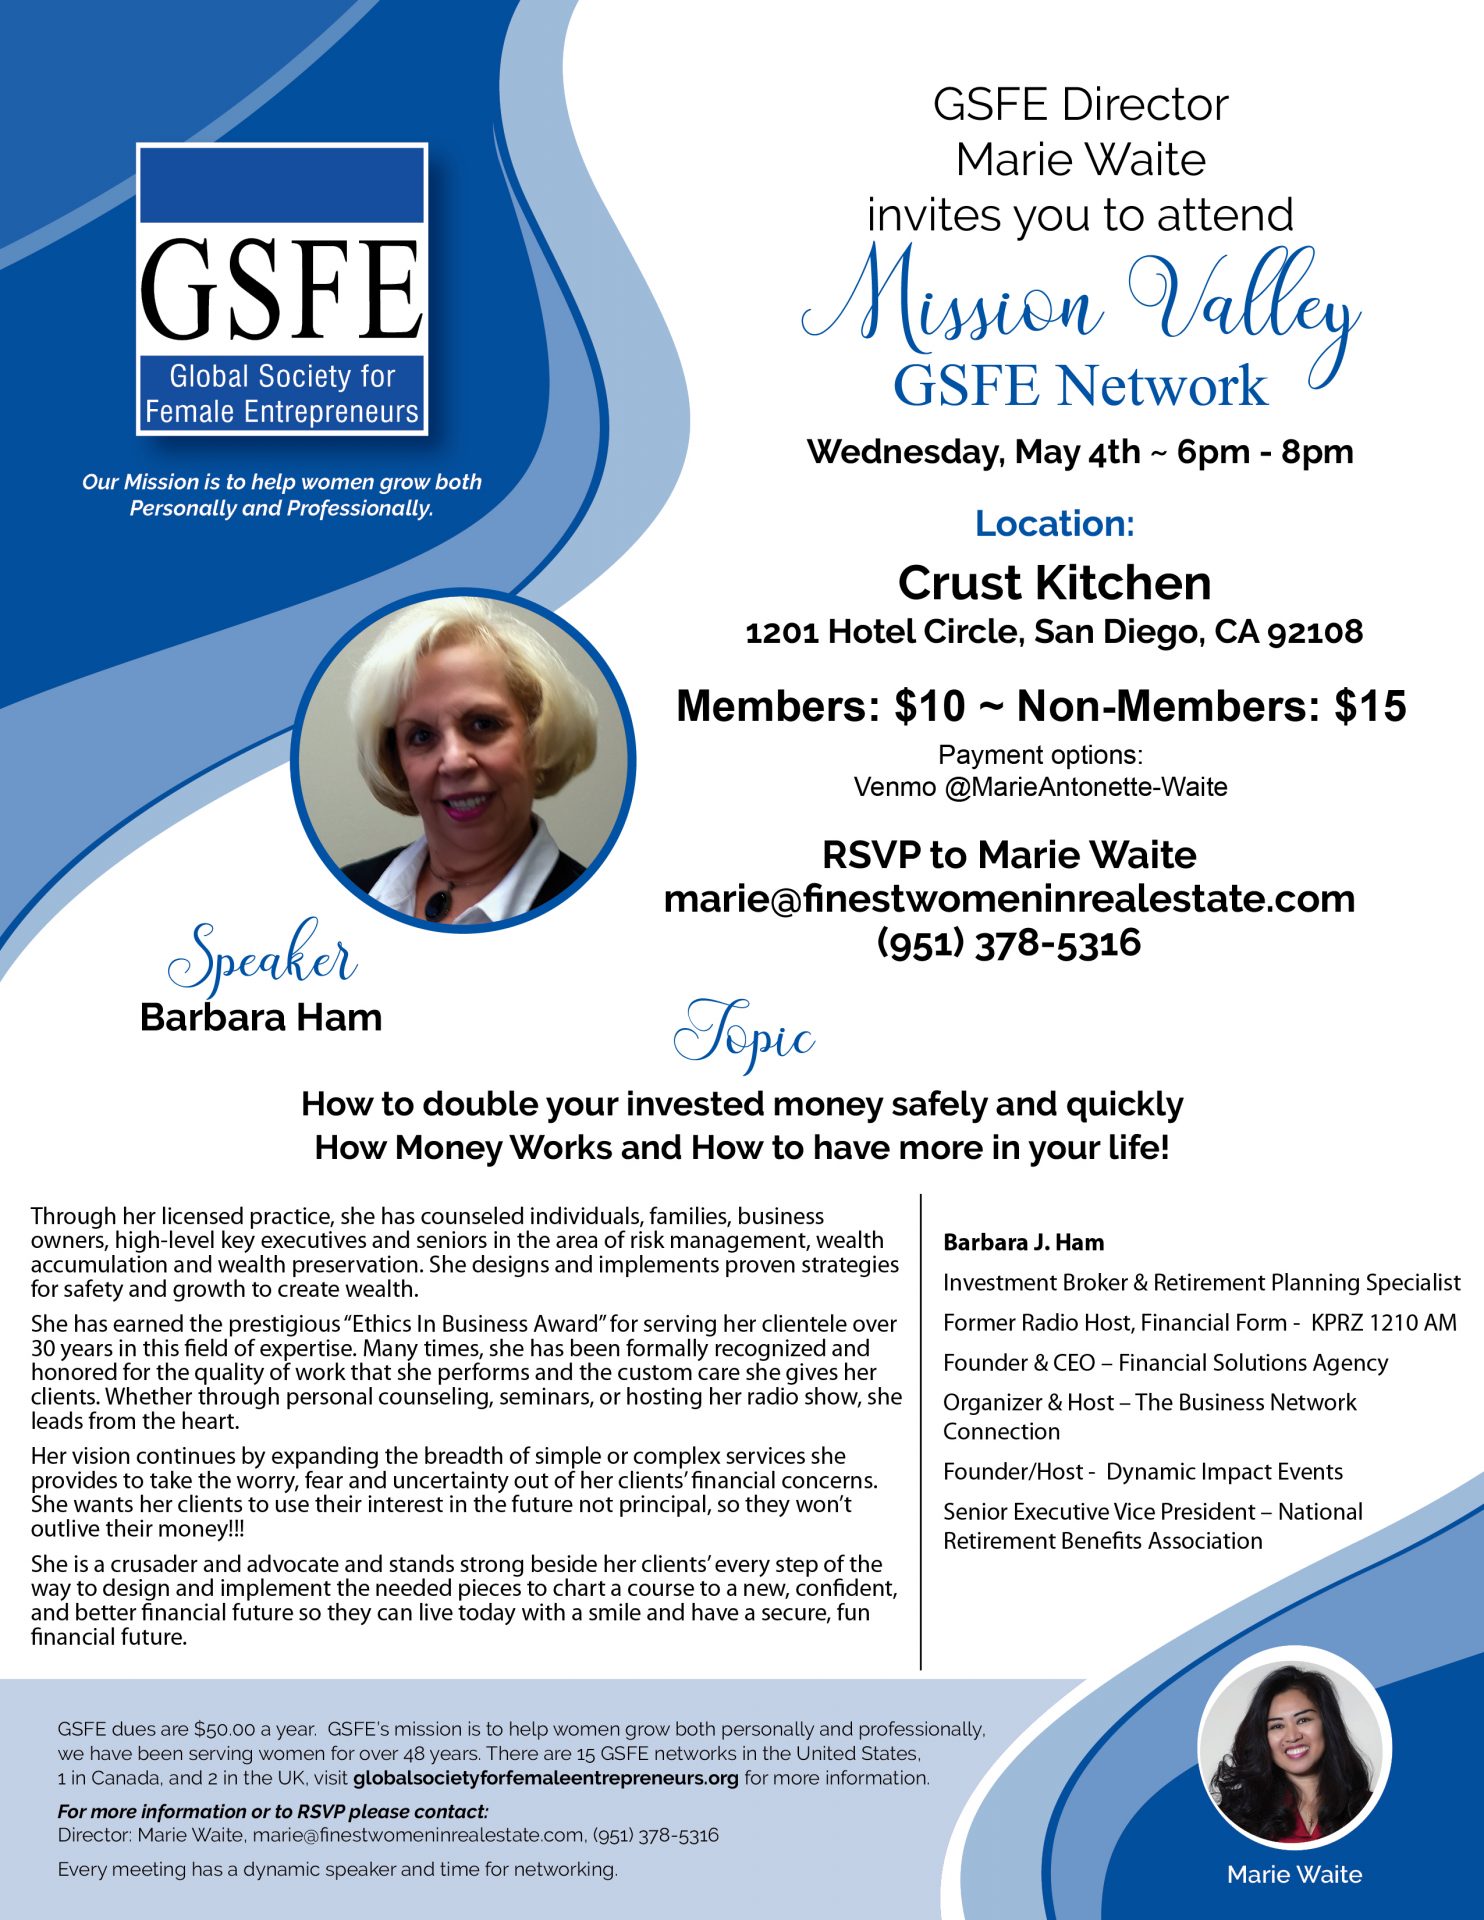 GSFE Meetings -May 2022-MISSION VALLEY